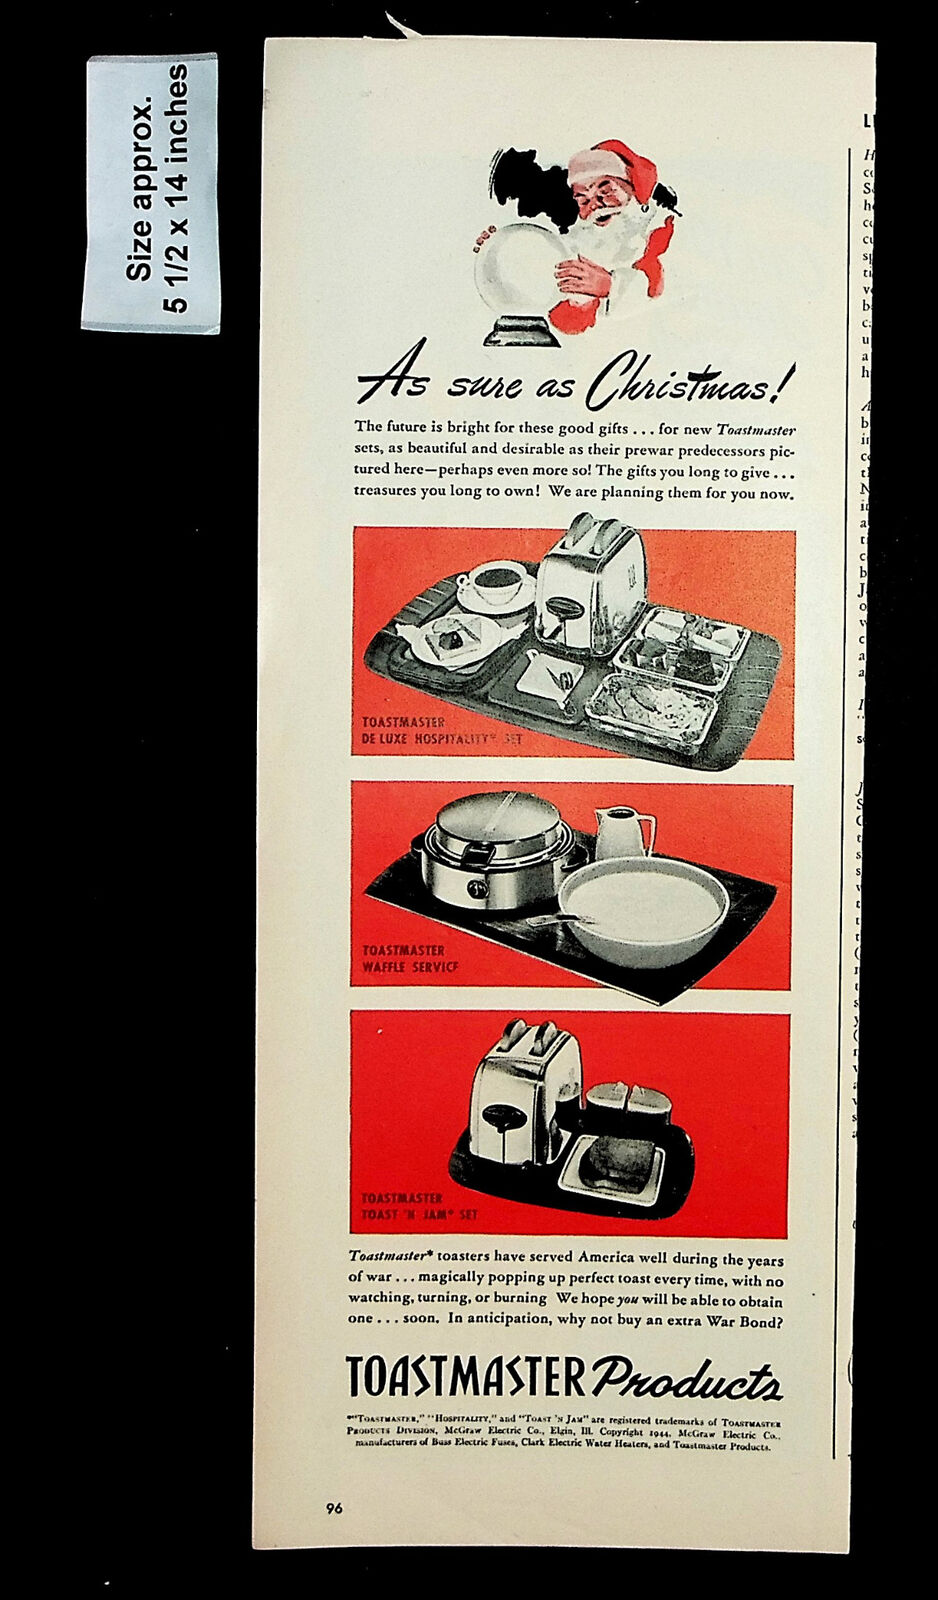 1944 Toastmaster Products Christmas Gifts Home Waffle Jam Vintage Print Ad 35164